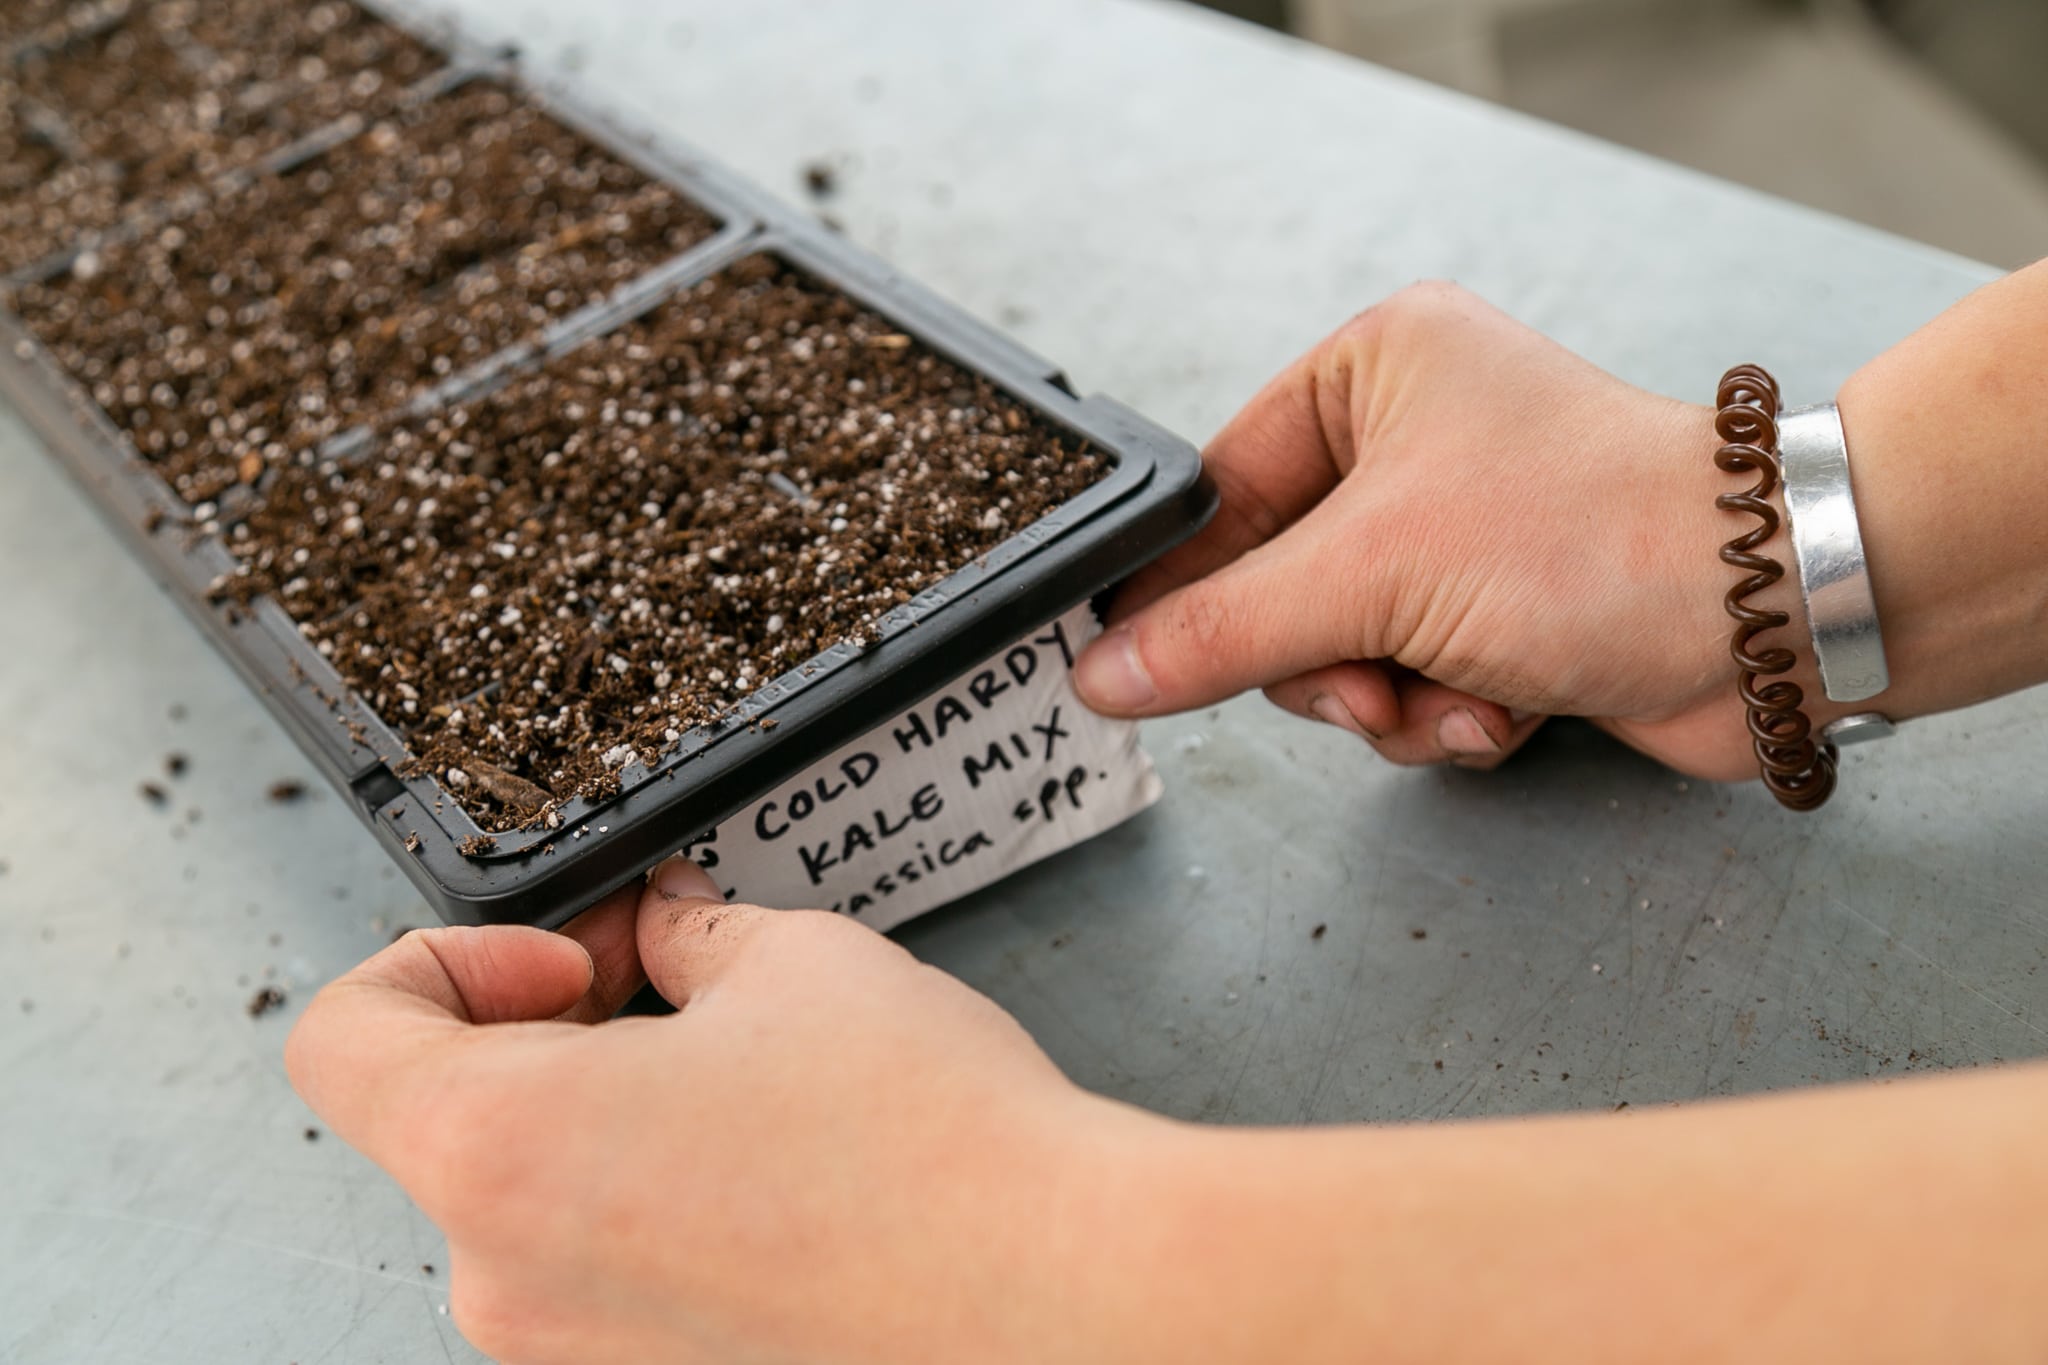 Hands placing label on seed tray